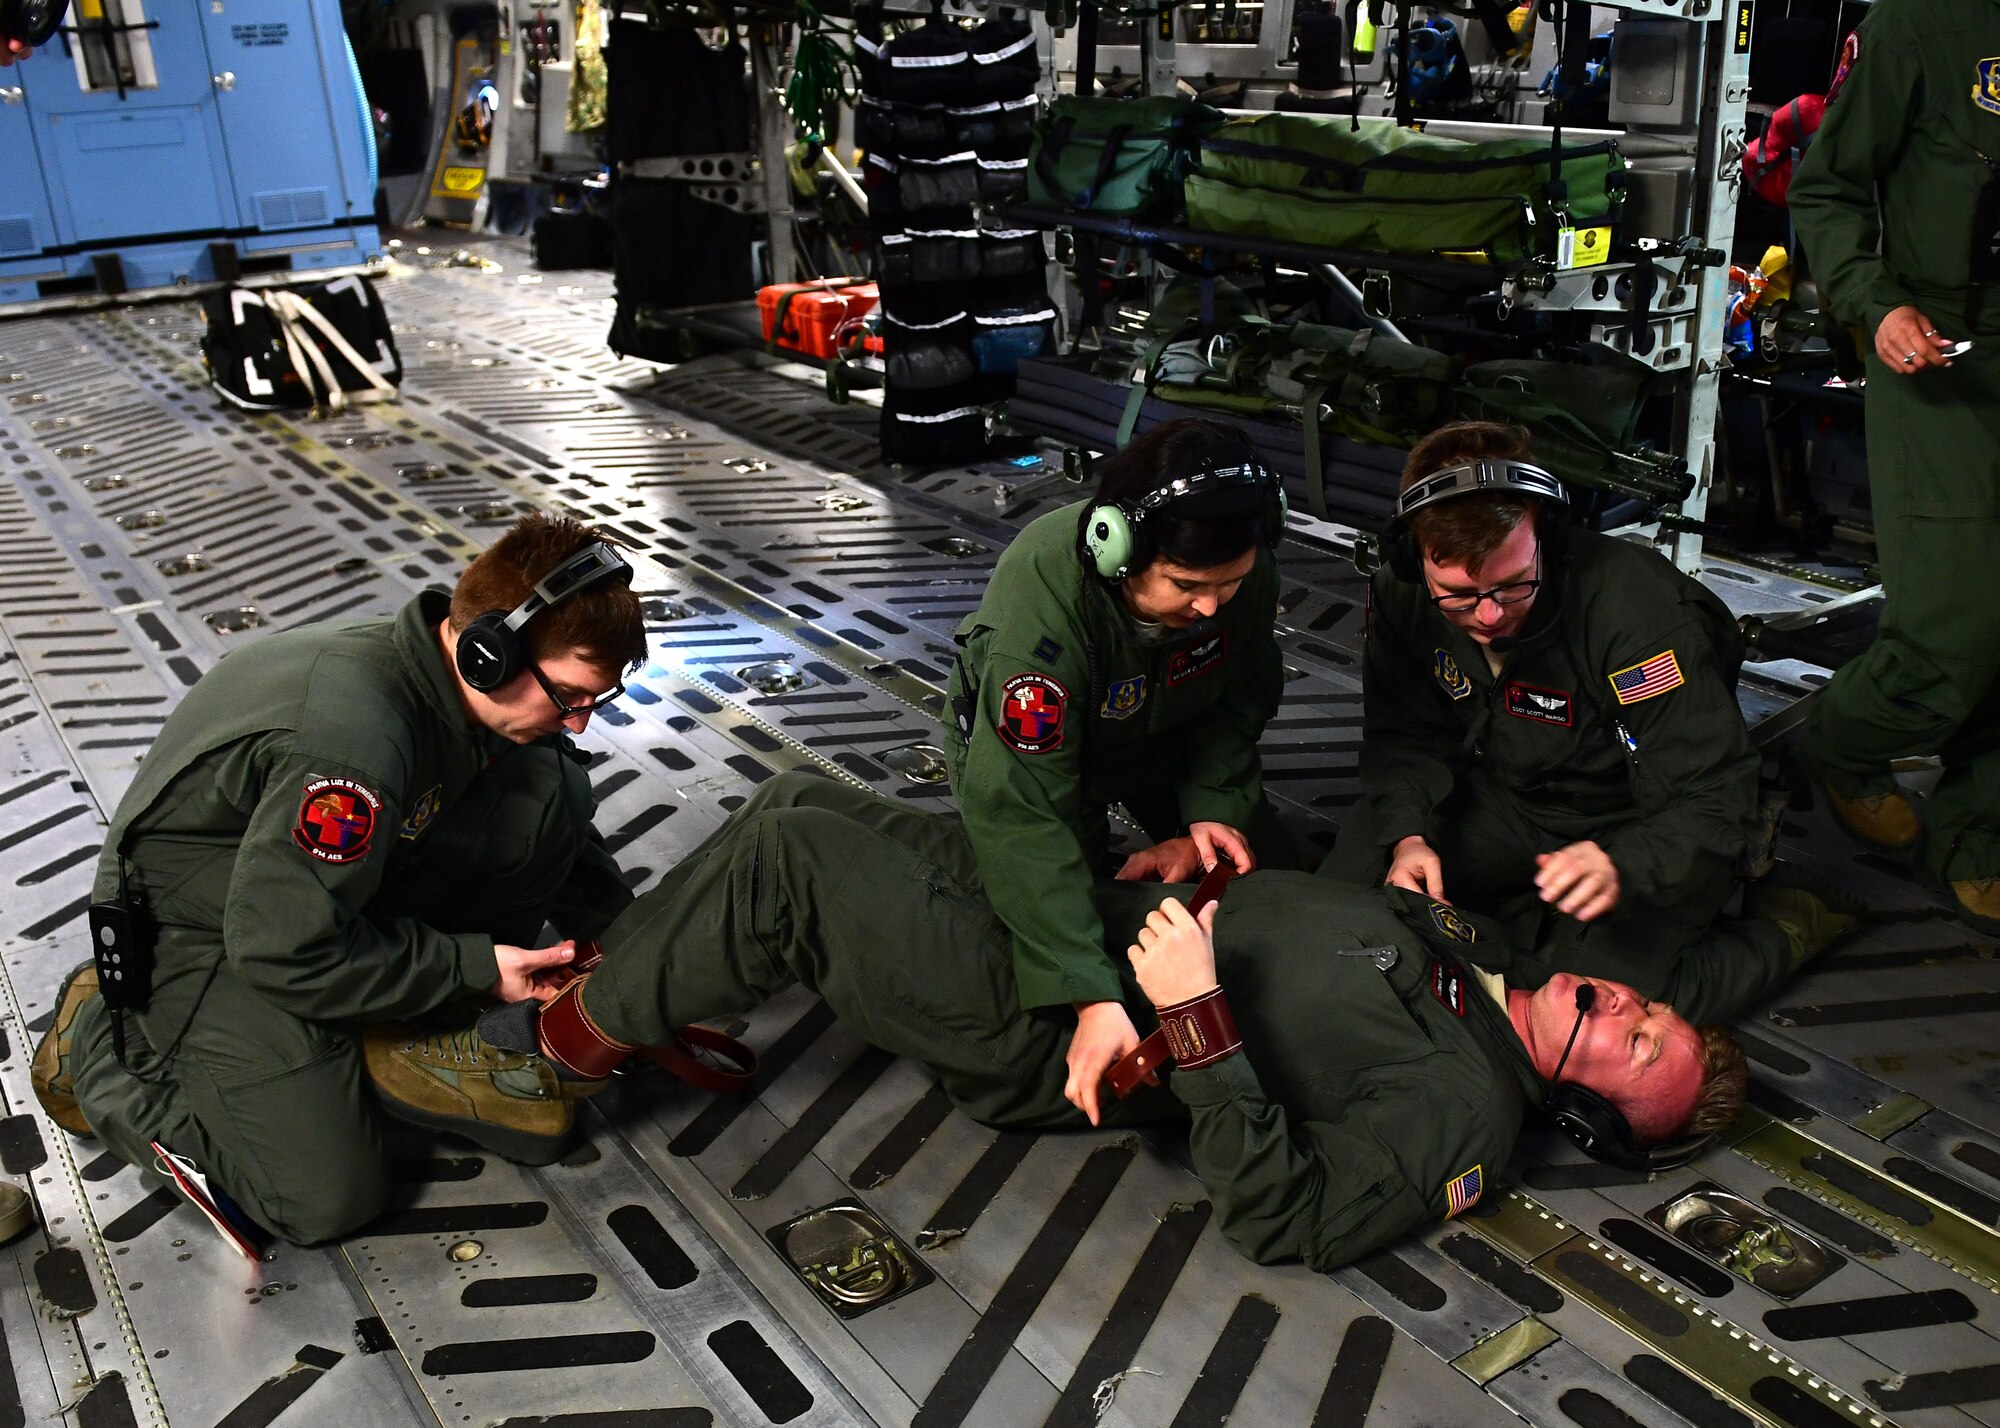 Staff Sgts. Raymond Johnson, John Klobushnik, and Scott Wardo, medical technicians with the 914th Aeromedical Evacuation Squadron, and Capt. Megan Taggert, 914th AES flight nurse, practice putting restraints on a mental health patient above Honolulu, Hawaii April 24, 2019. Johnson was playing the part of the mental health patient while Klobushnik, Wardo and Taggert practiced the restraint procedures. (U.S. Air Force photo by Senior Airman Grace Thomson)